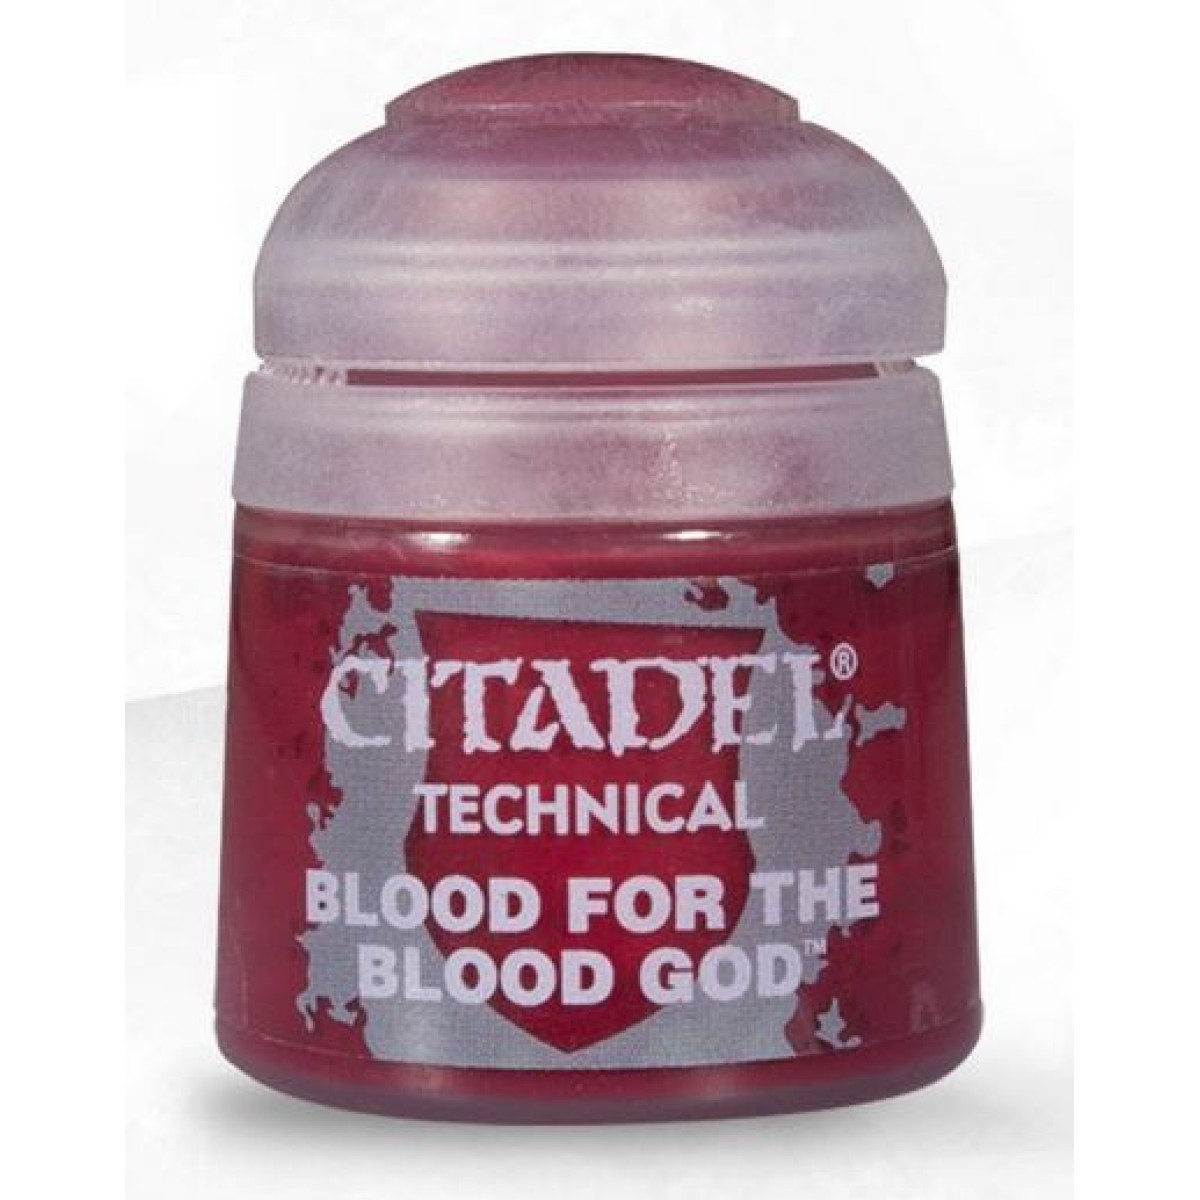 Citadel Colour – Technical – Blood for the Blood God